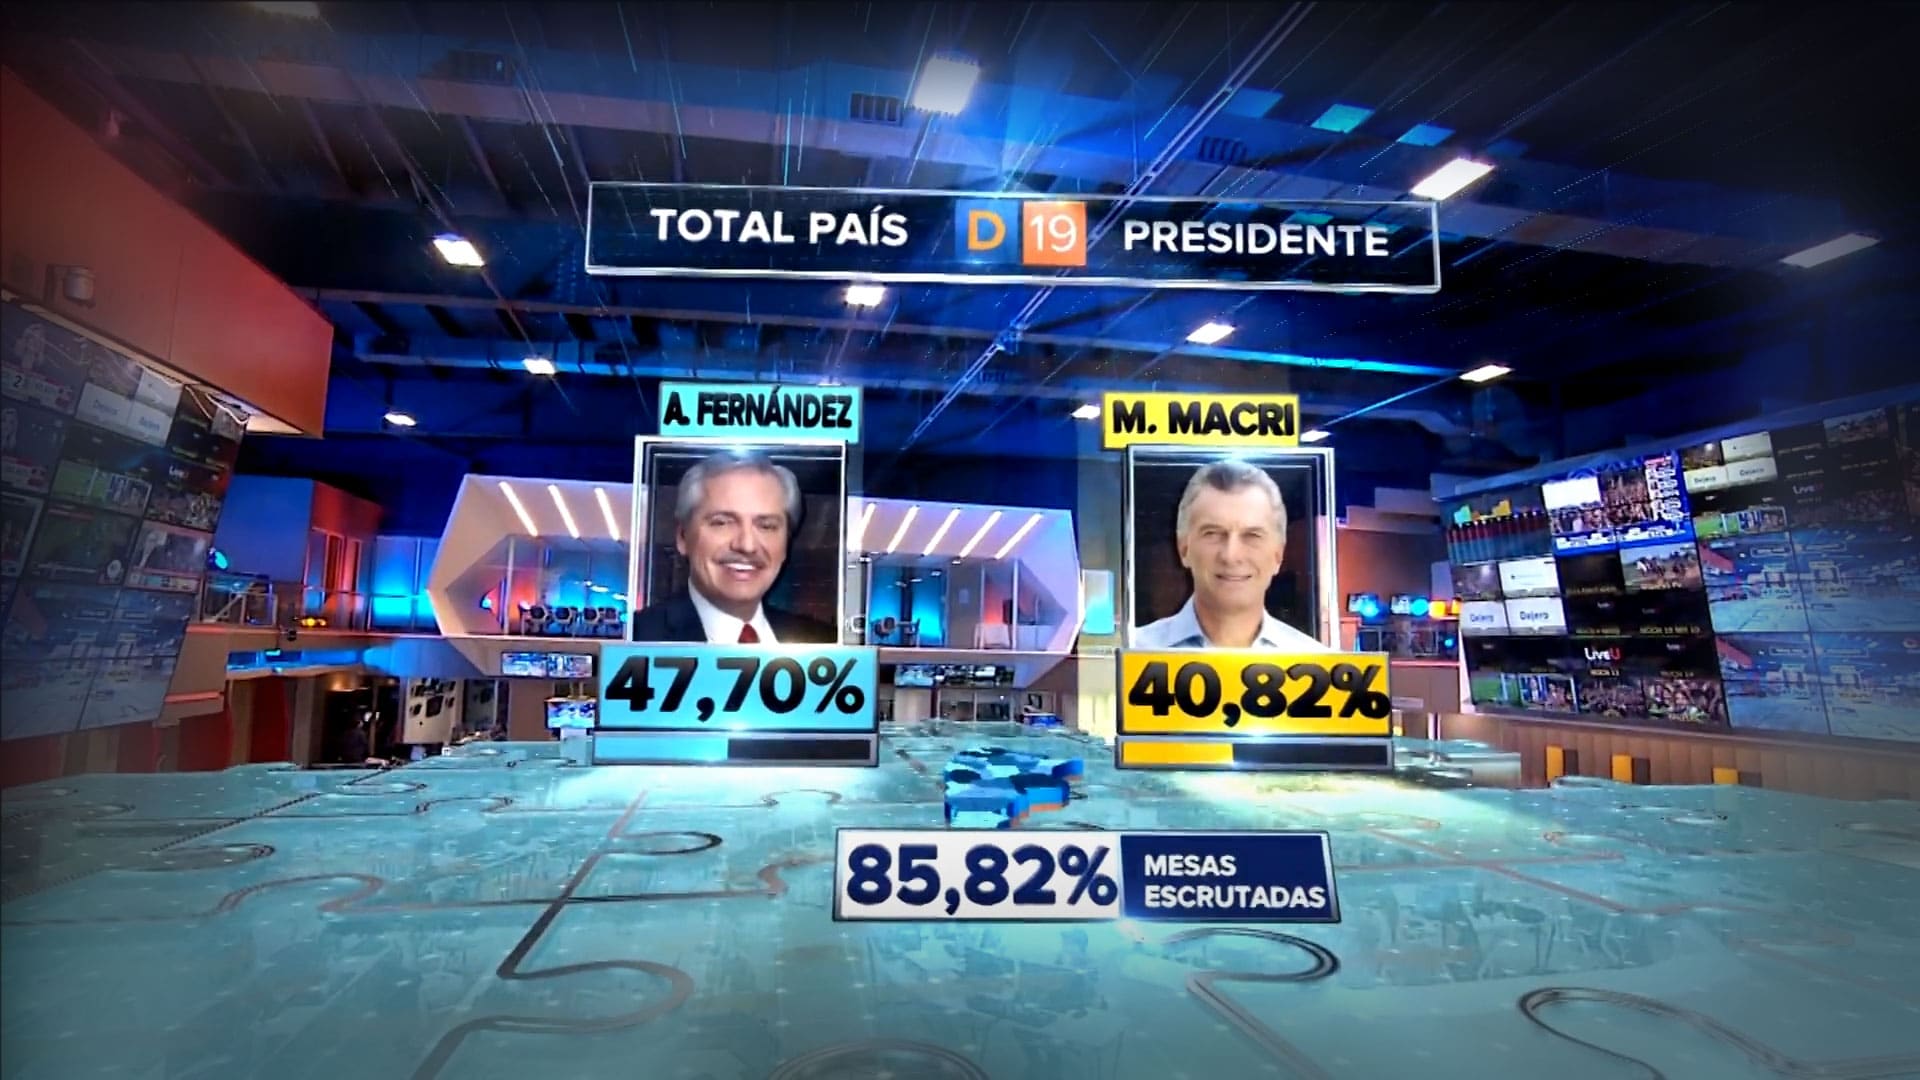 2019 Argentina Presidential Elections Girraphic